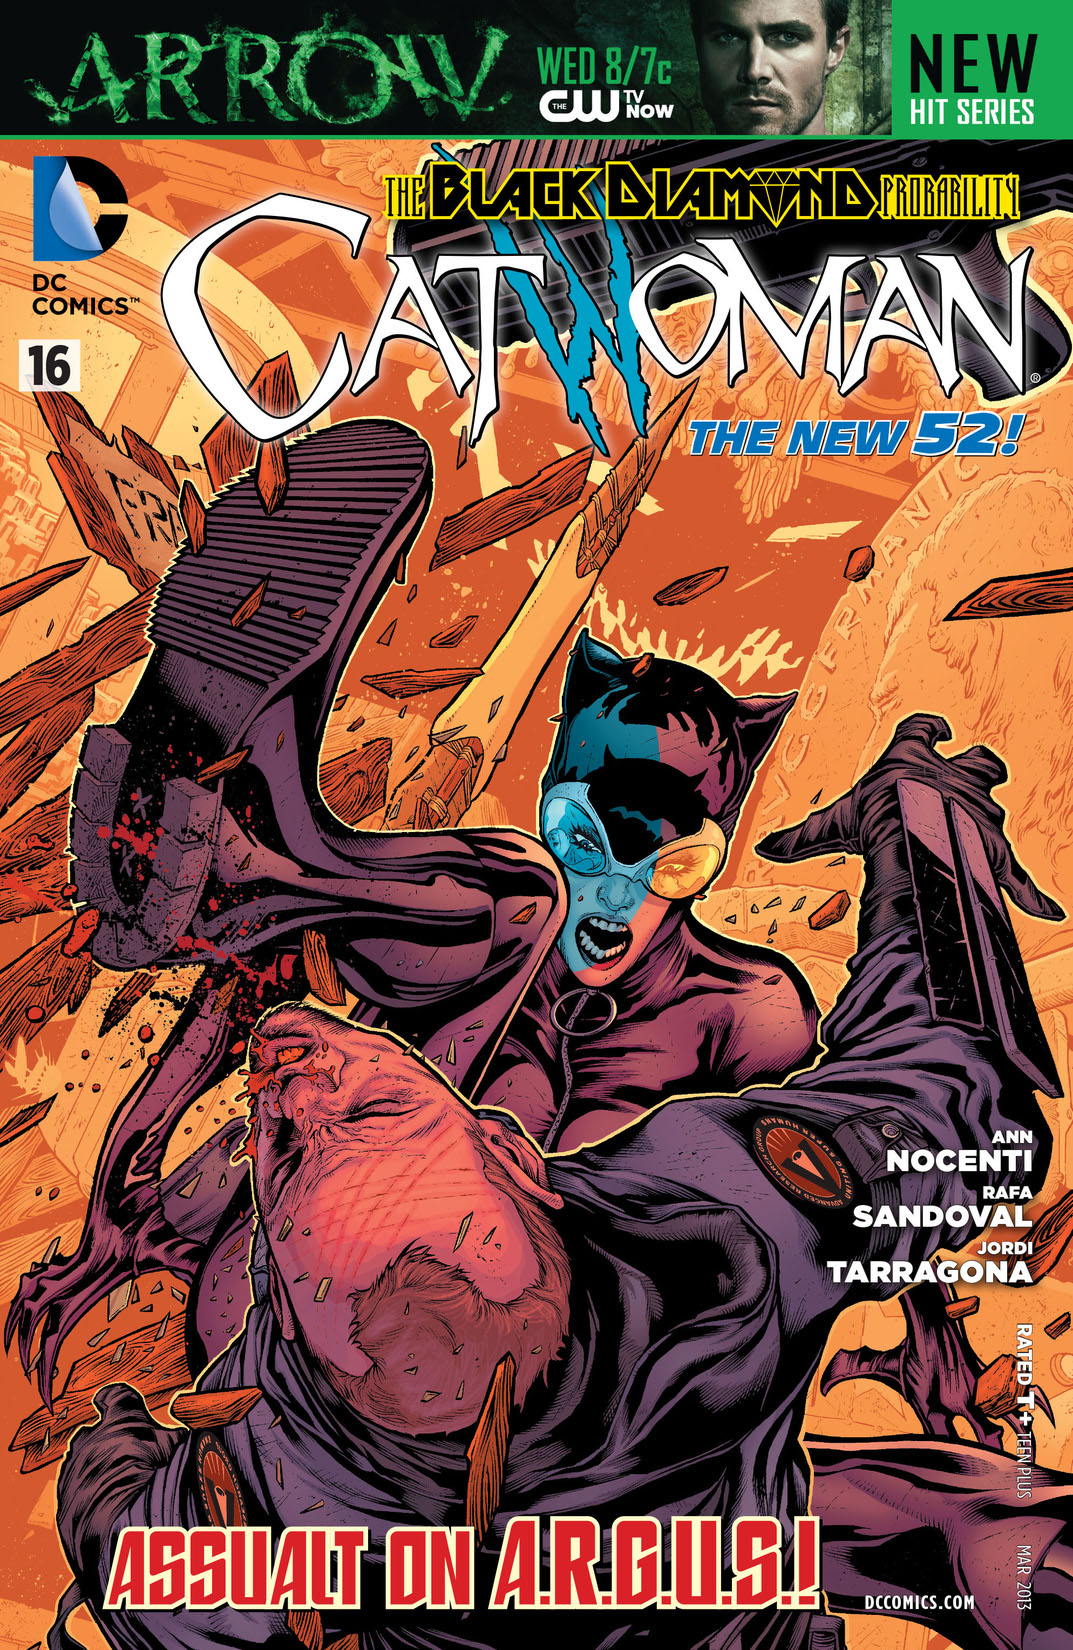 Catwoman (2011-) #16 preview images